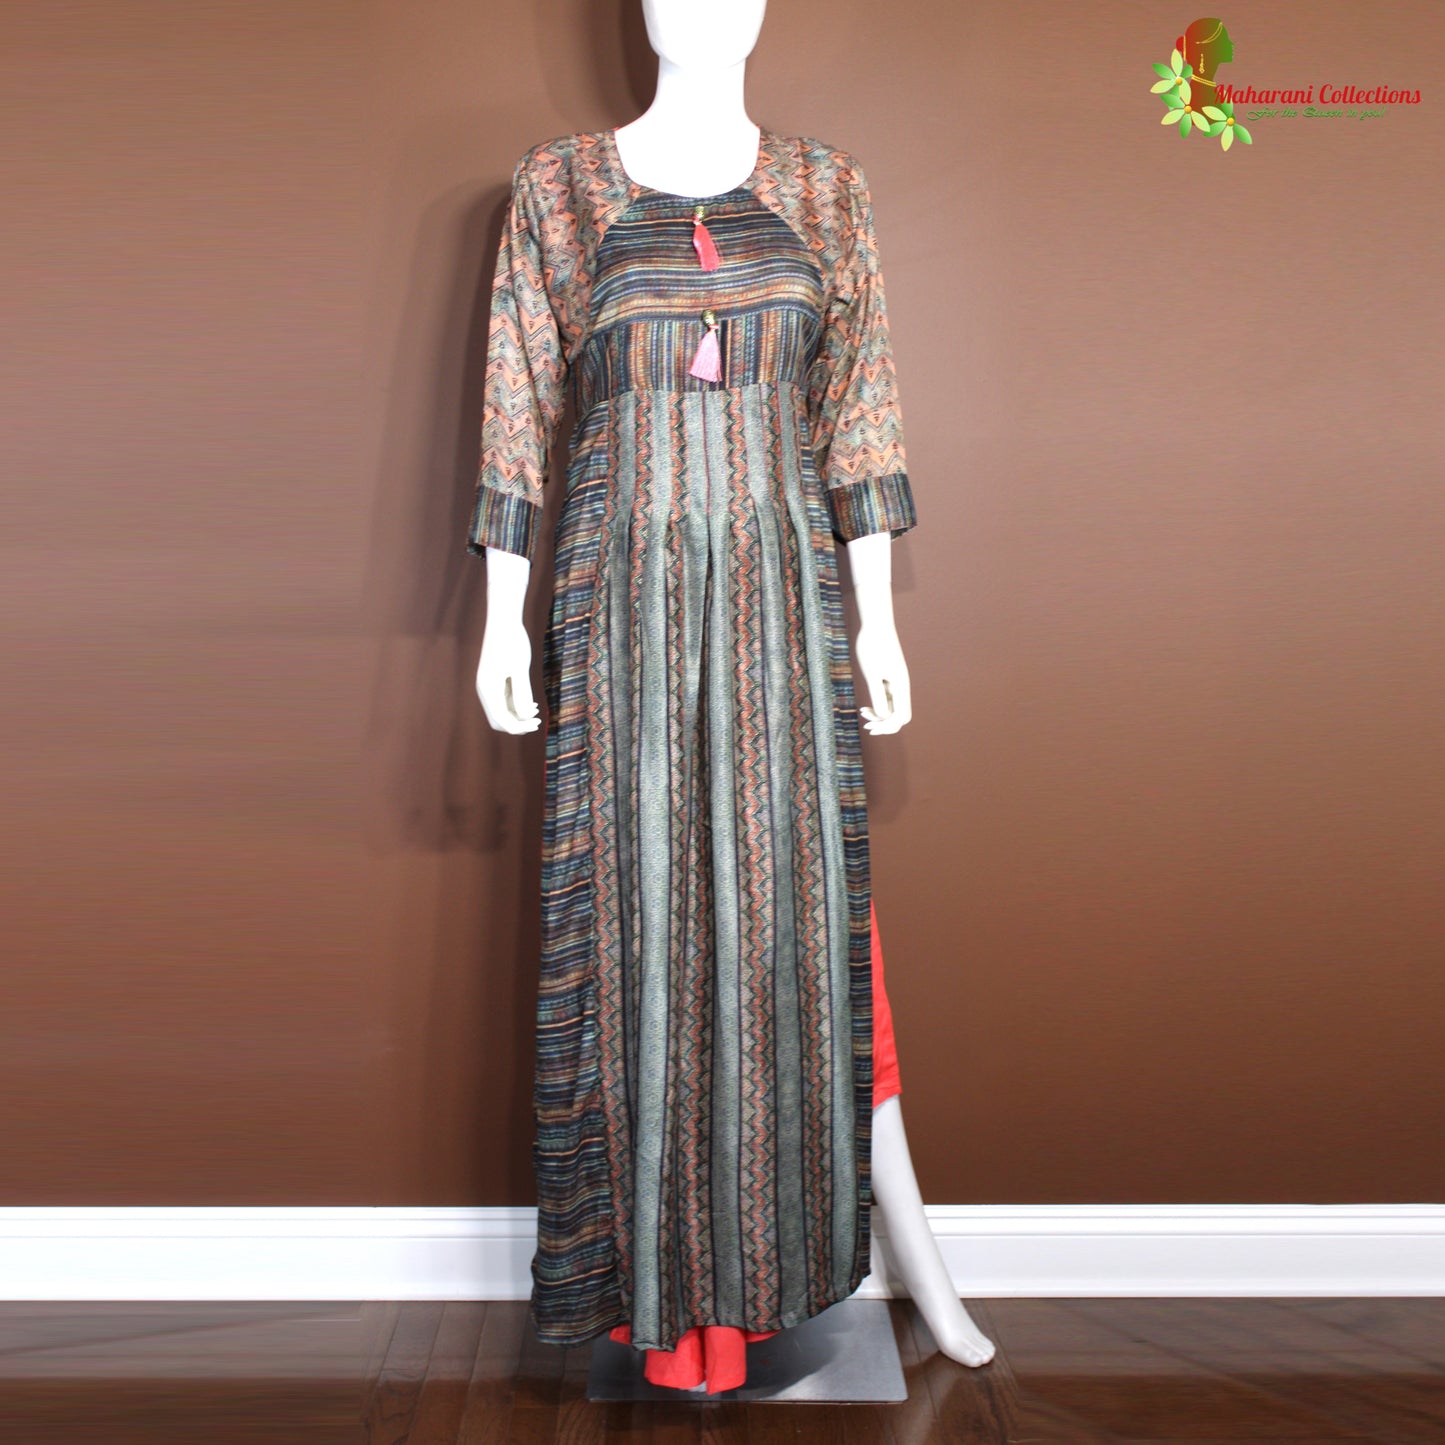 Maharani's Georgette Long Evening Dress - Brown/Red (S)